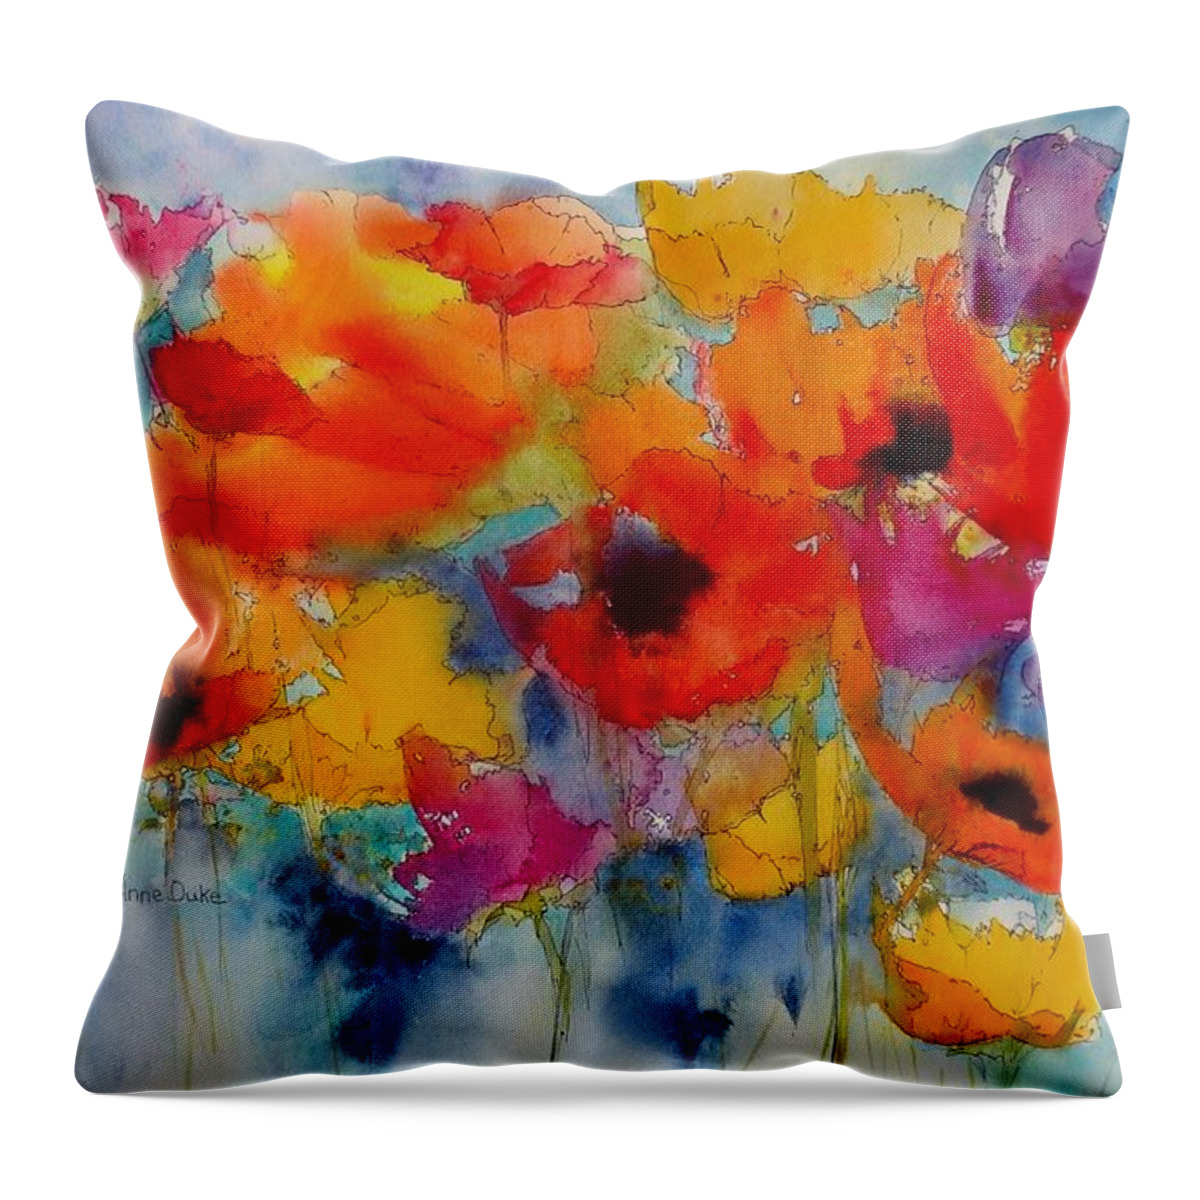 Floral Watercolor Throw Pillow featuring the painting Marianne's Garden by Anne Duke